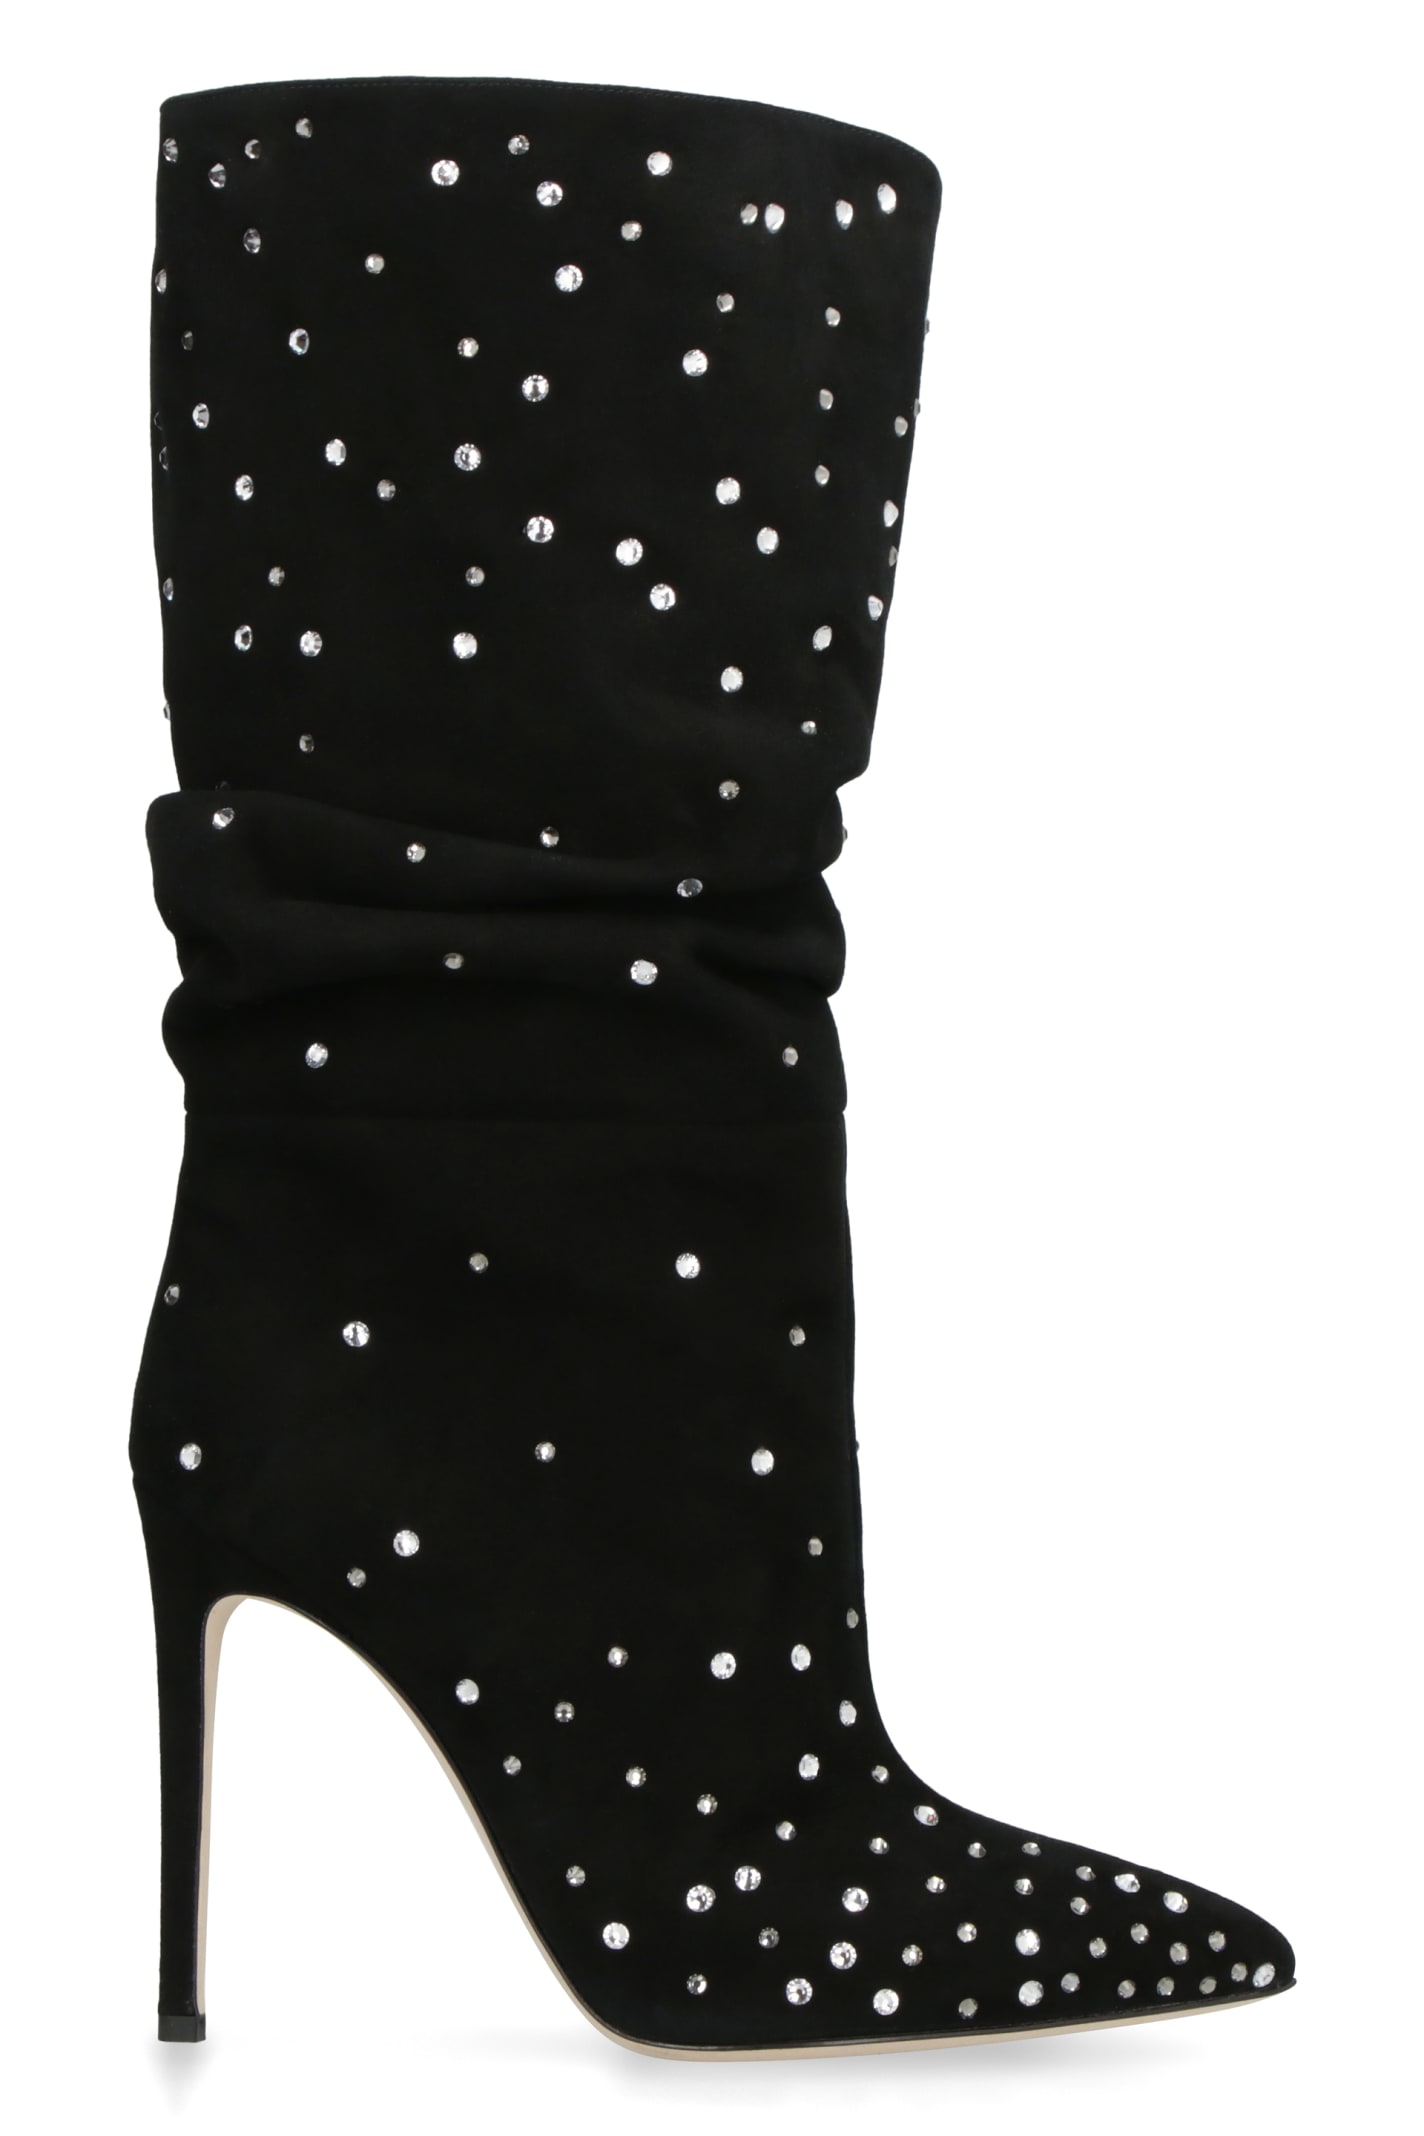 Shop Paris Texas Holly Suede Knee High Boots In Black Diamond